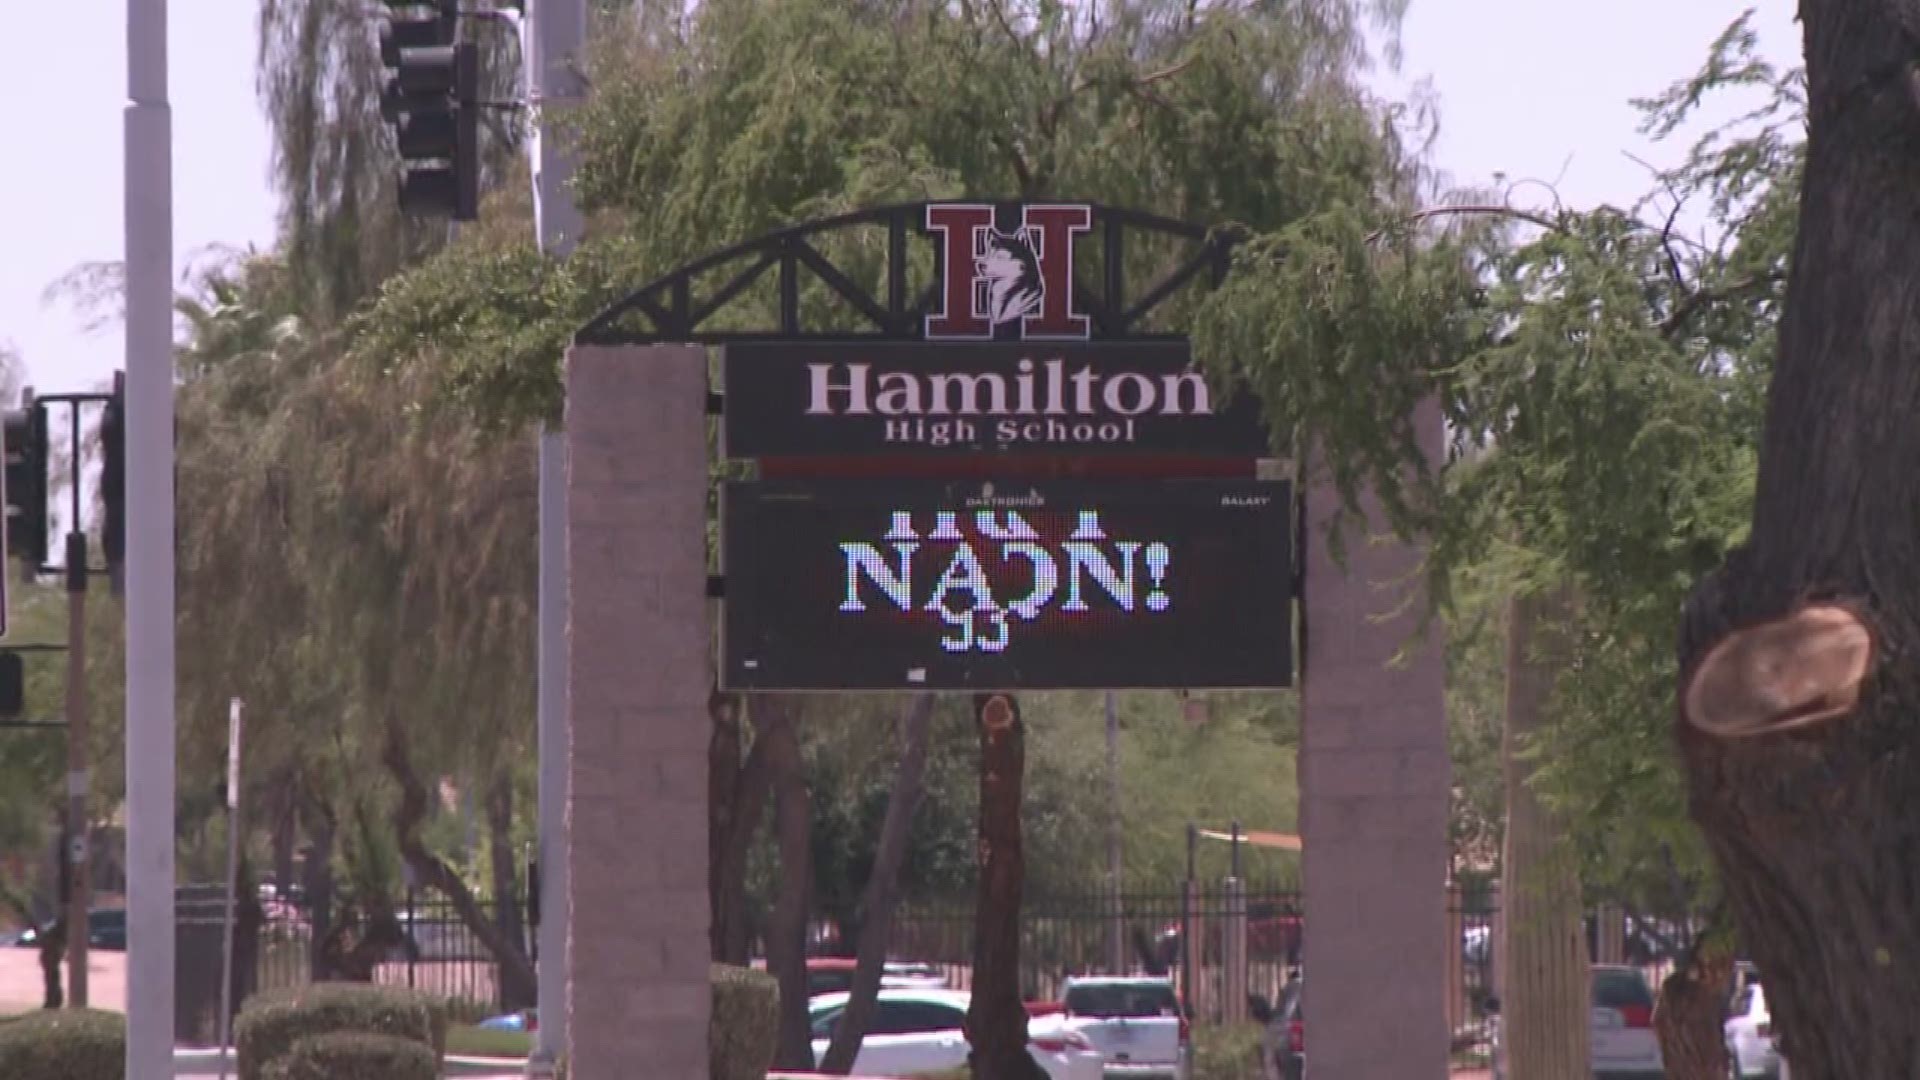 New evidence shows principal Ken James and former football coach Steve Belles of Hamilton High School were aware of the hazing incidents but failed to report the allegations to the Chandler police.